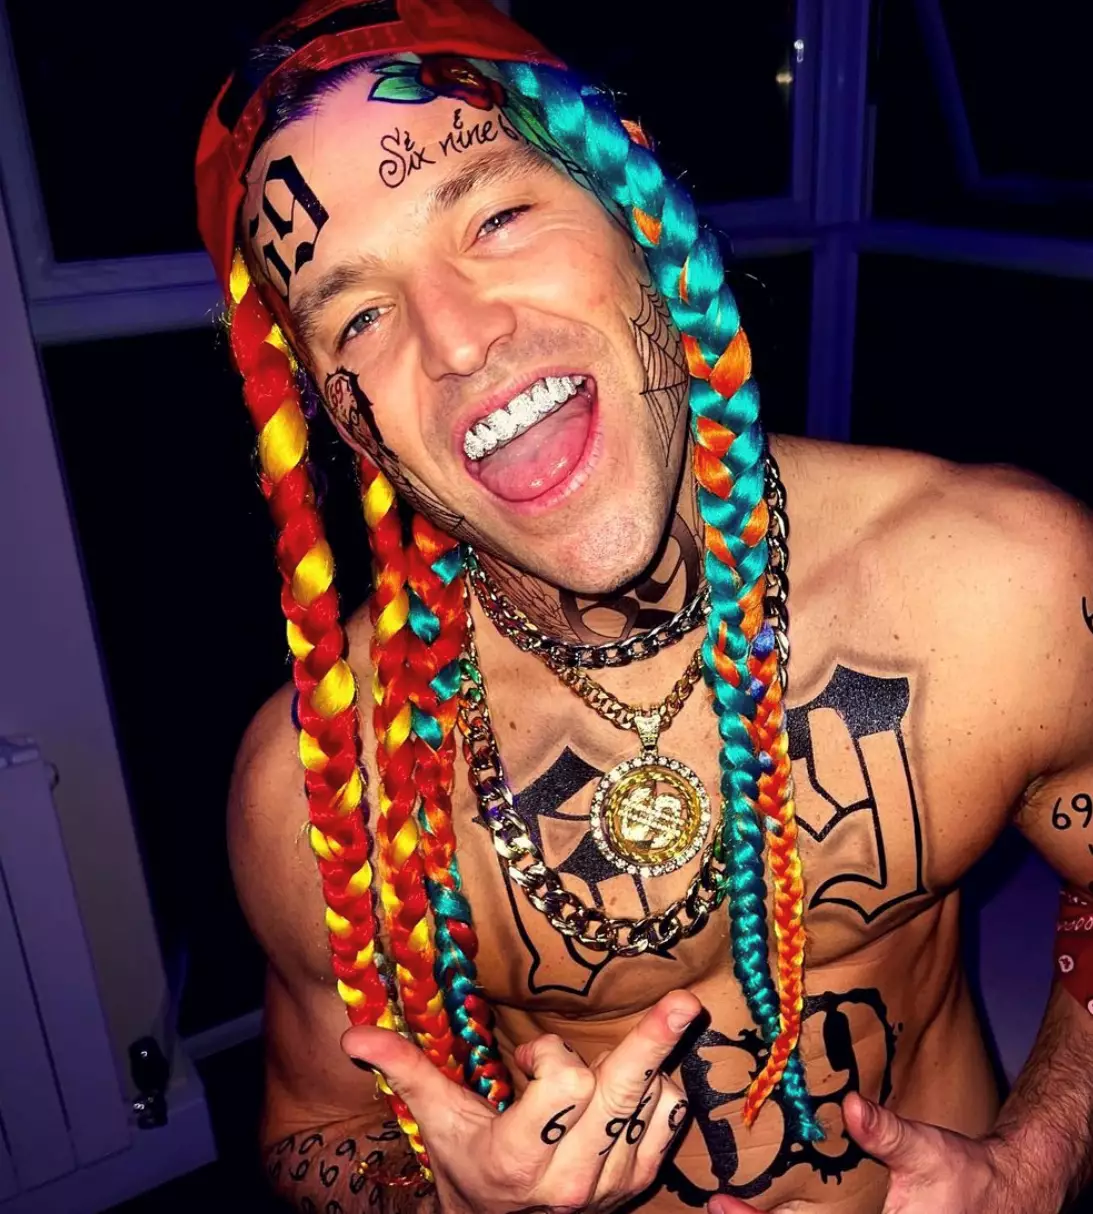 Mark Wright dressed as Takeshi 6ix9ine in a now-deleted Instagram post.